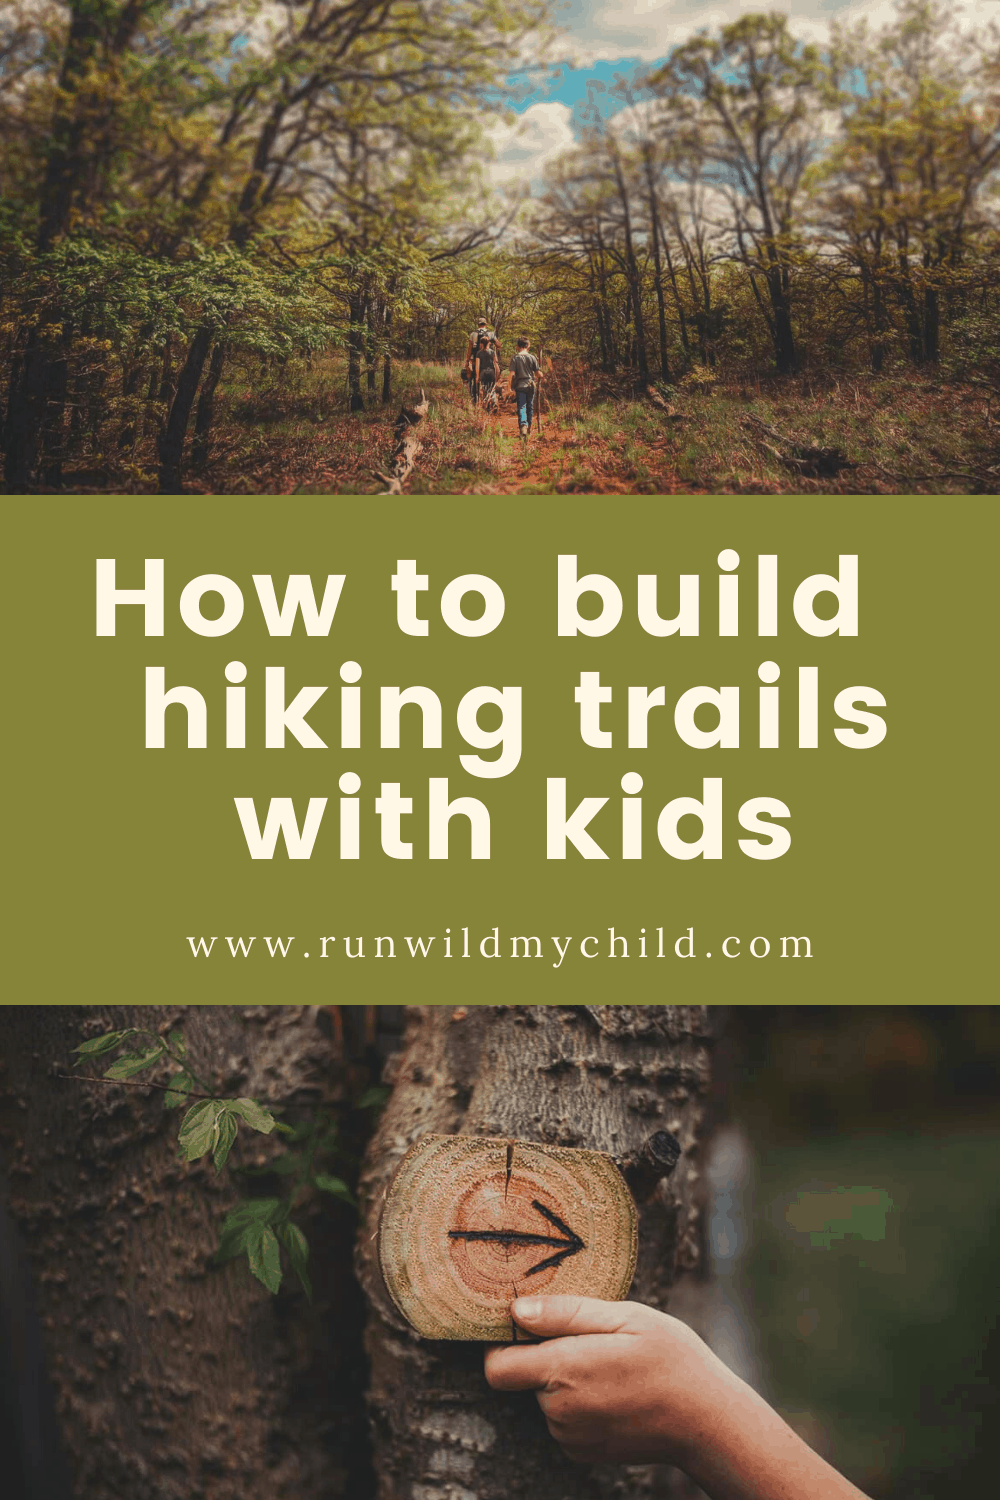 How to Build and Maintain Hiking Trails with Kids 2